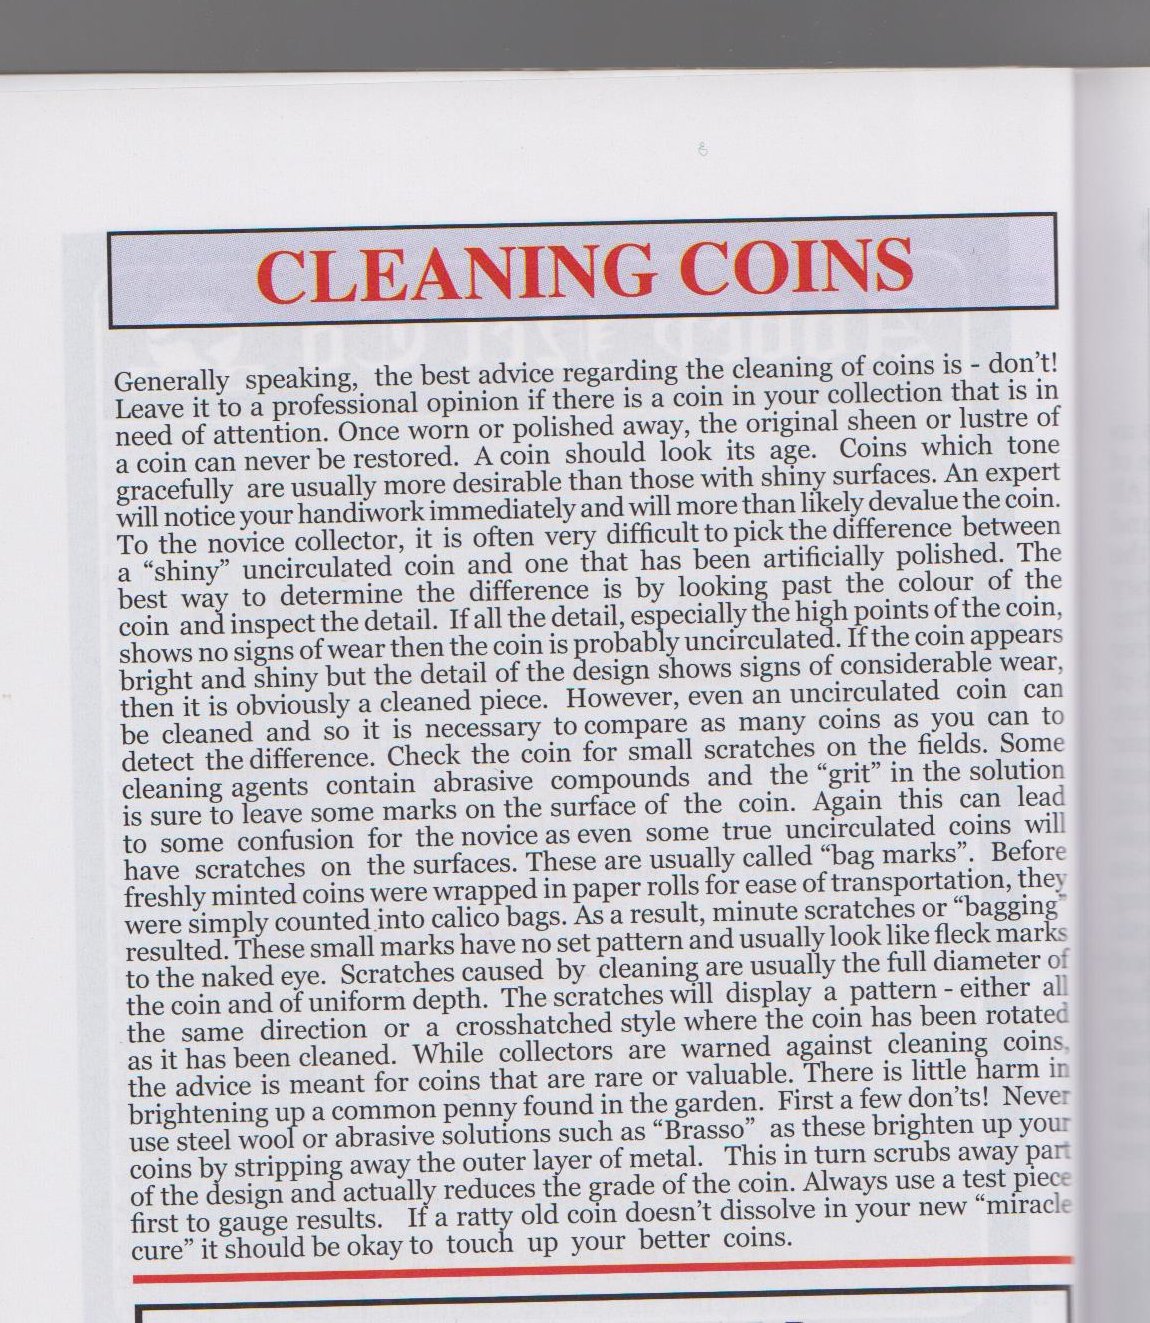 Cleaning Coins.jpg